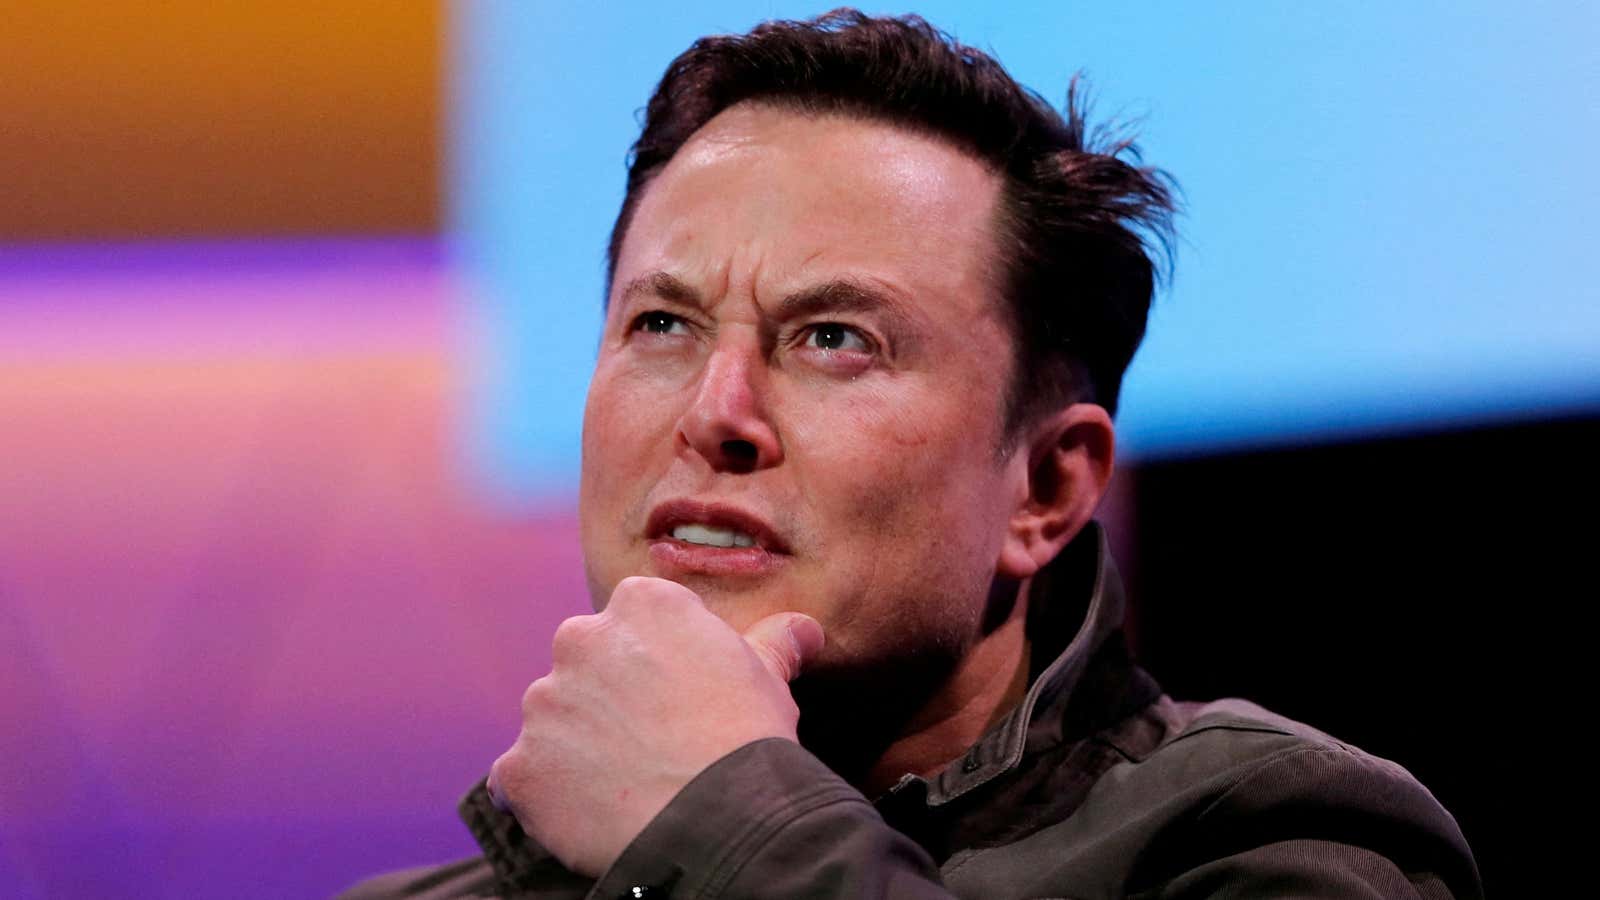 Elon Musk is not on the Twitter board but he’s still the company’s largest shareholder.